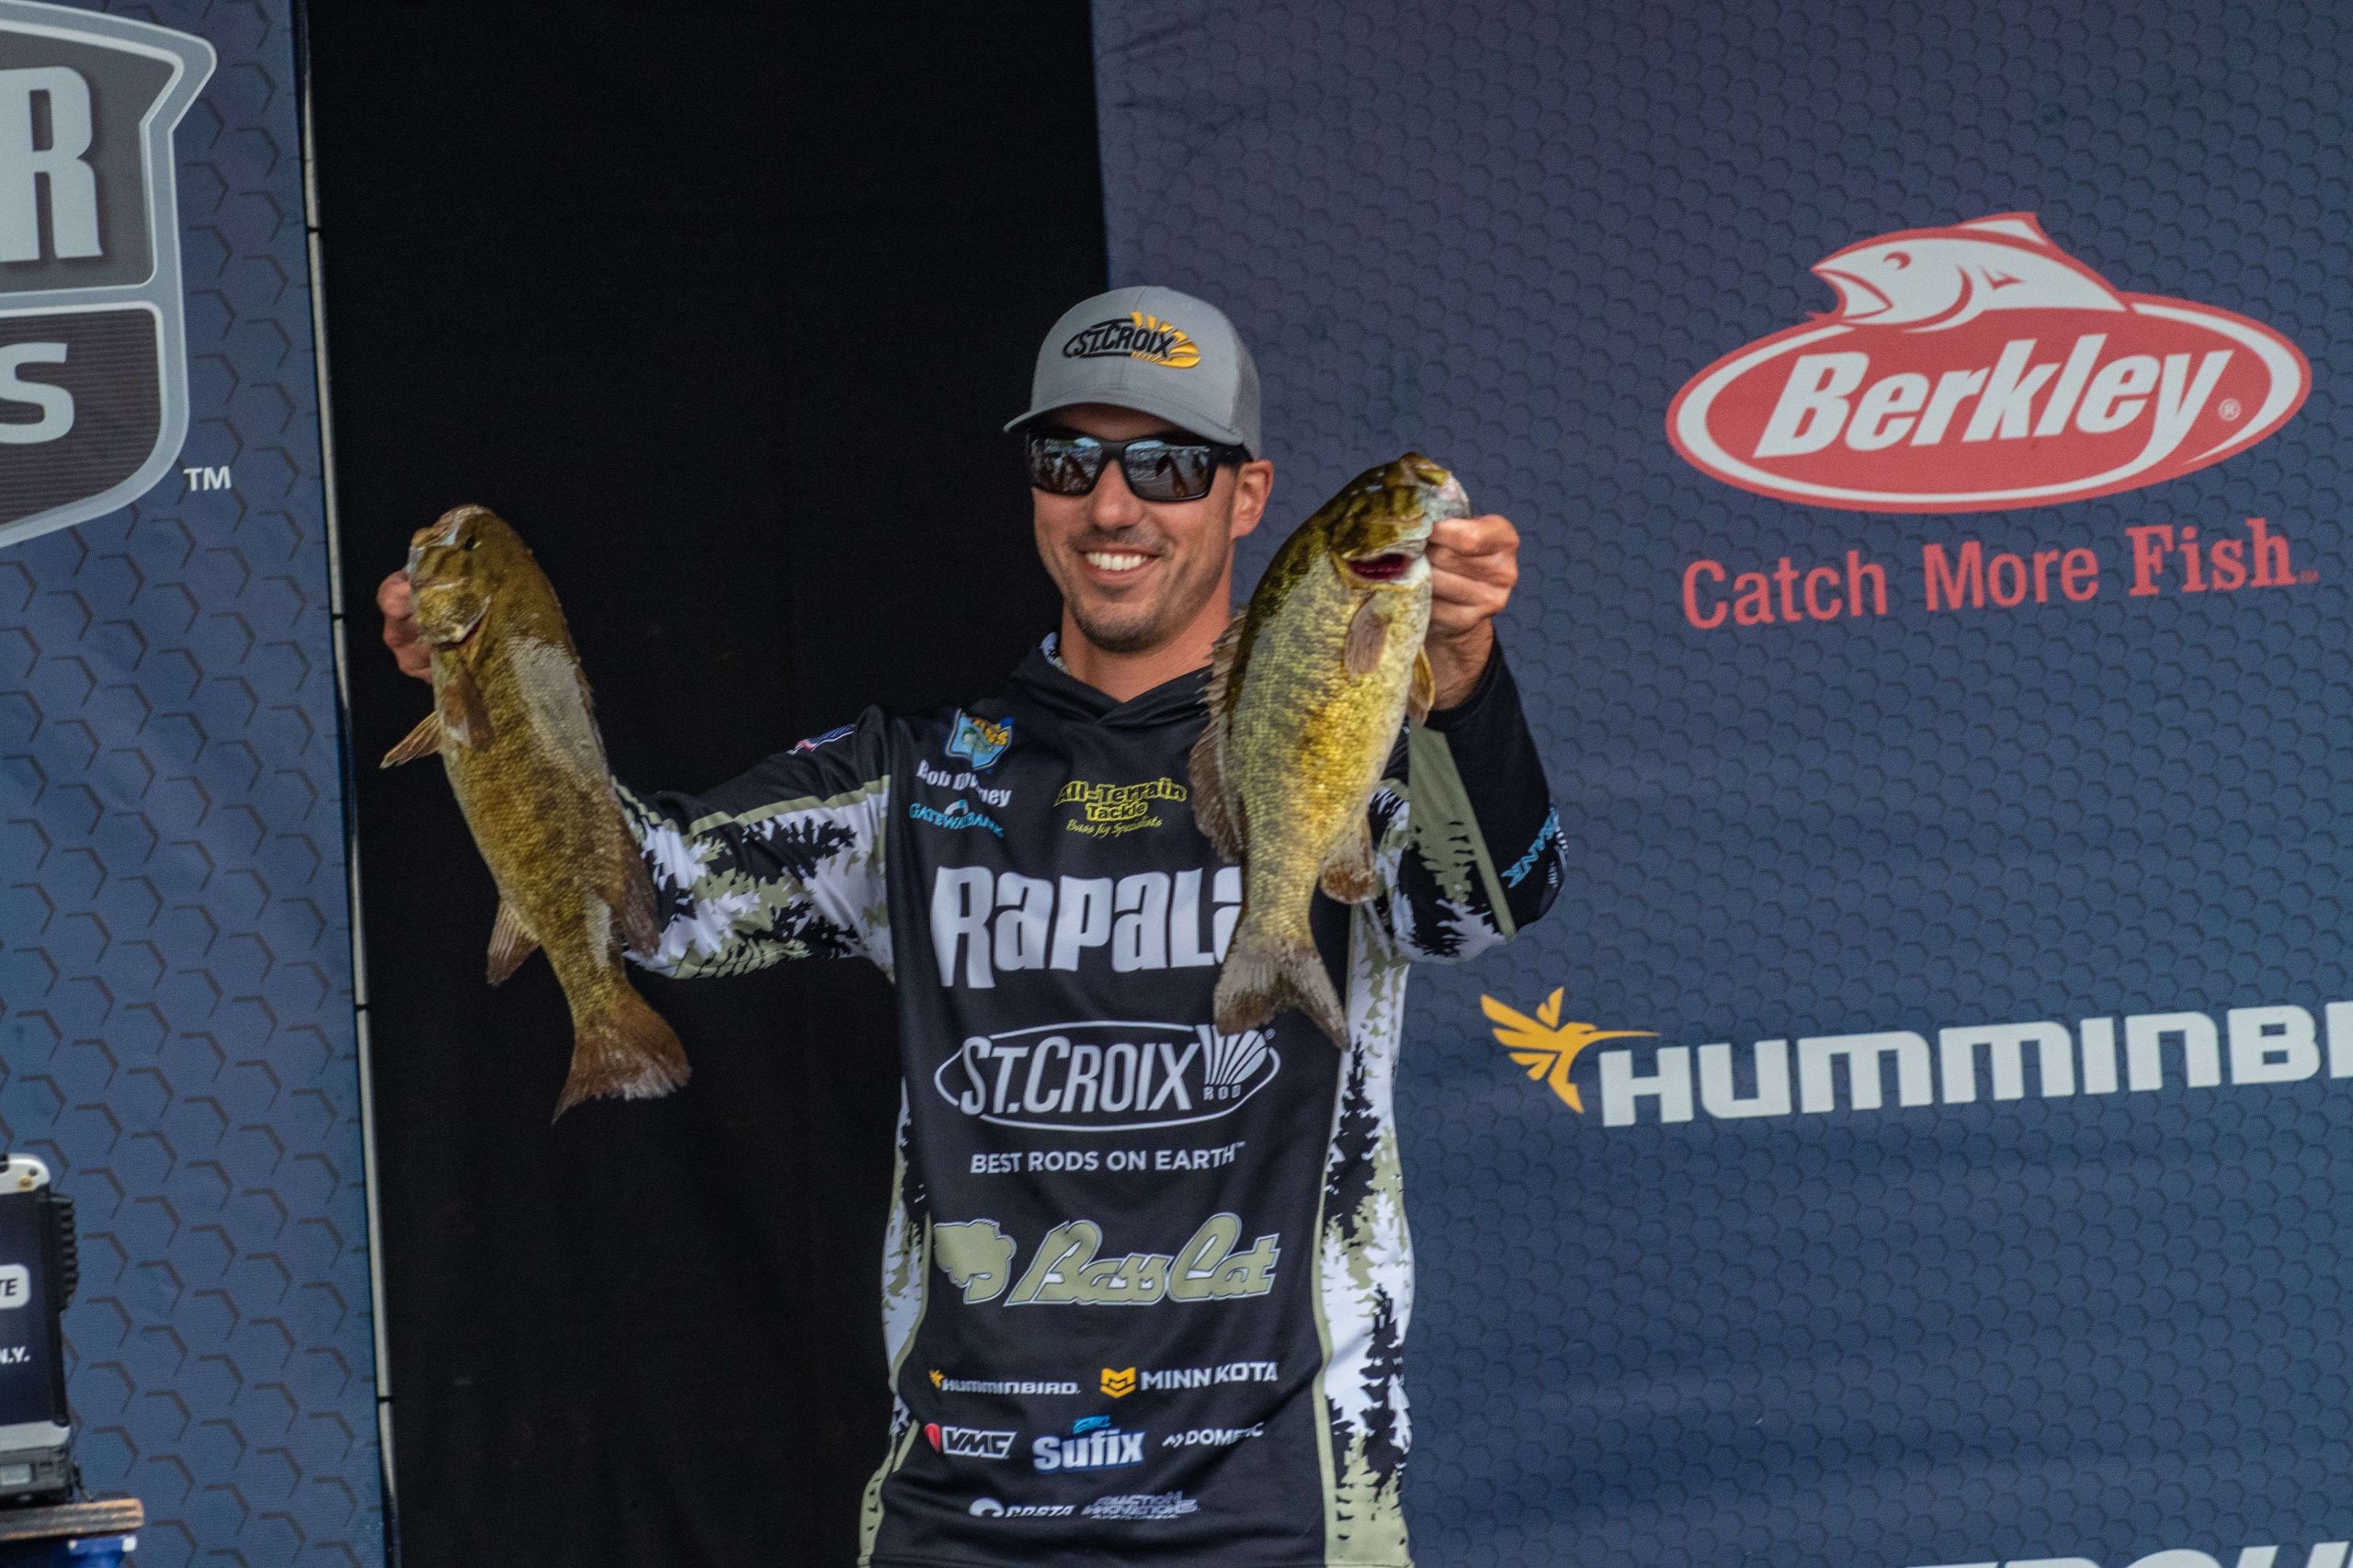 We asked Bassmaster Elite Series pro Bob Downey to show us his top five setups for fall fishing on Mille Lacs Lake. Bob lives in Hudson, Wis., and spends a lot of time fishing around the area. Mille Lacs is not his home lake, but it is one of the best smallmouth factories in the North.